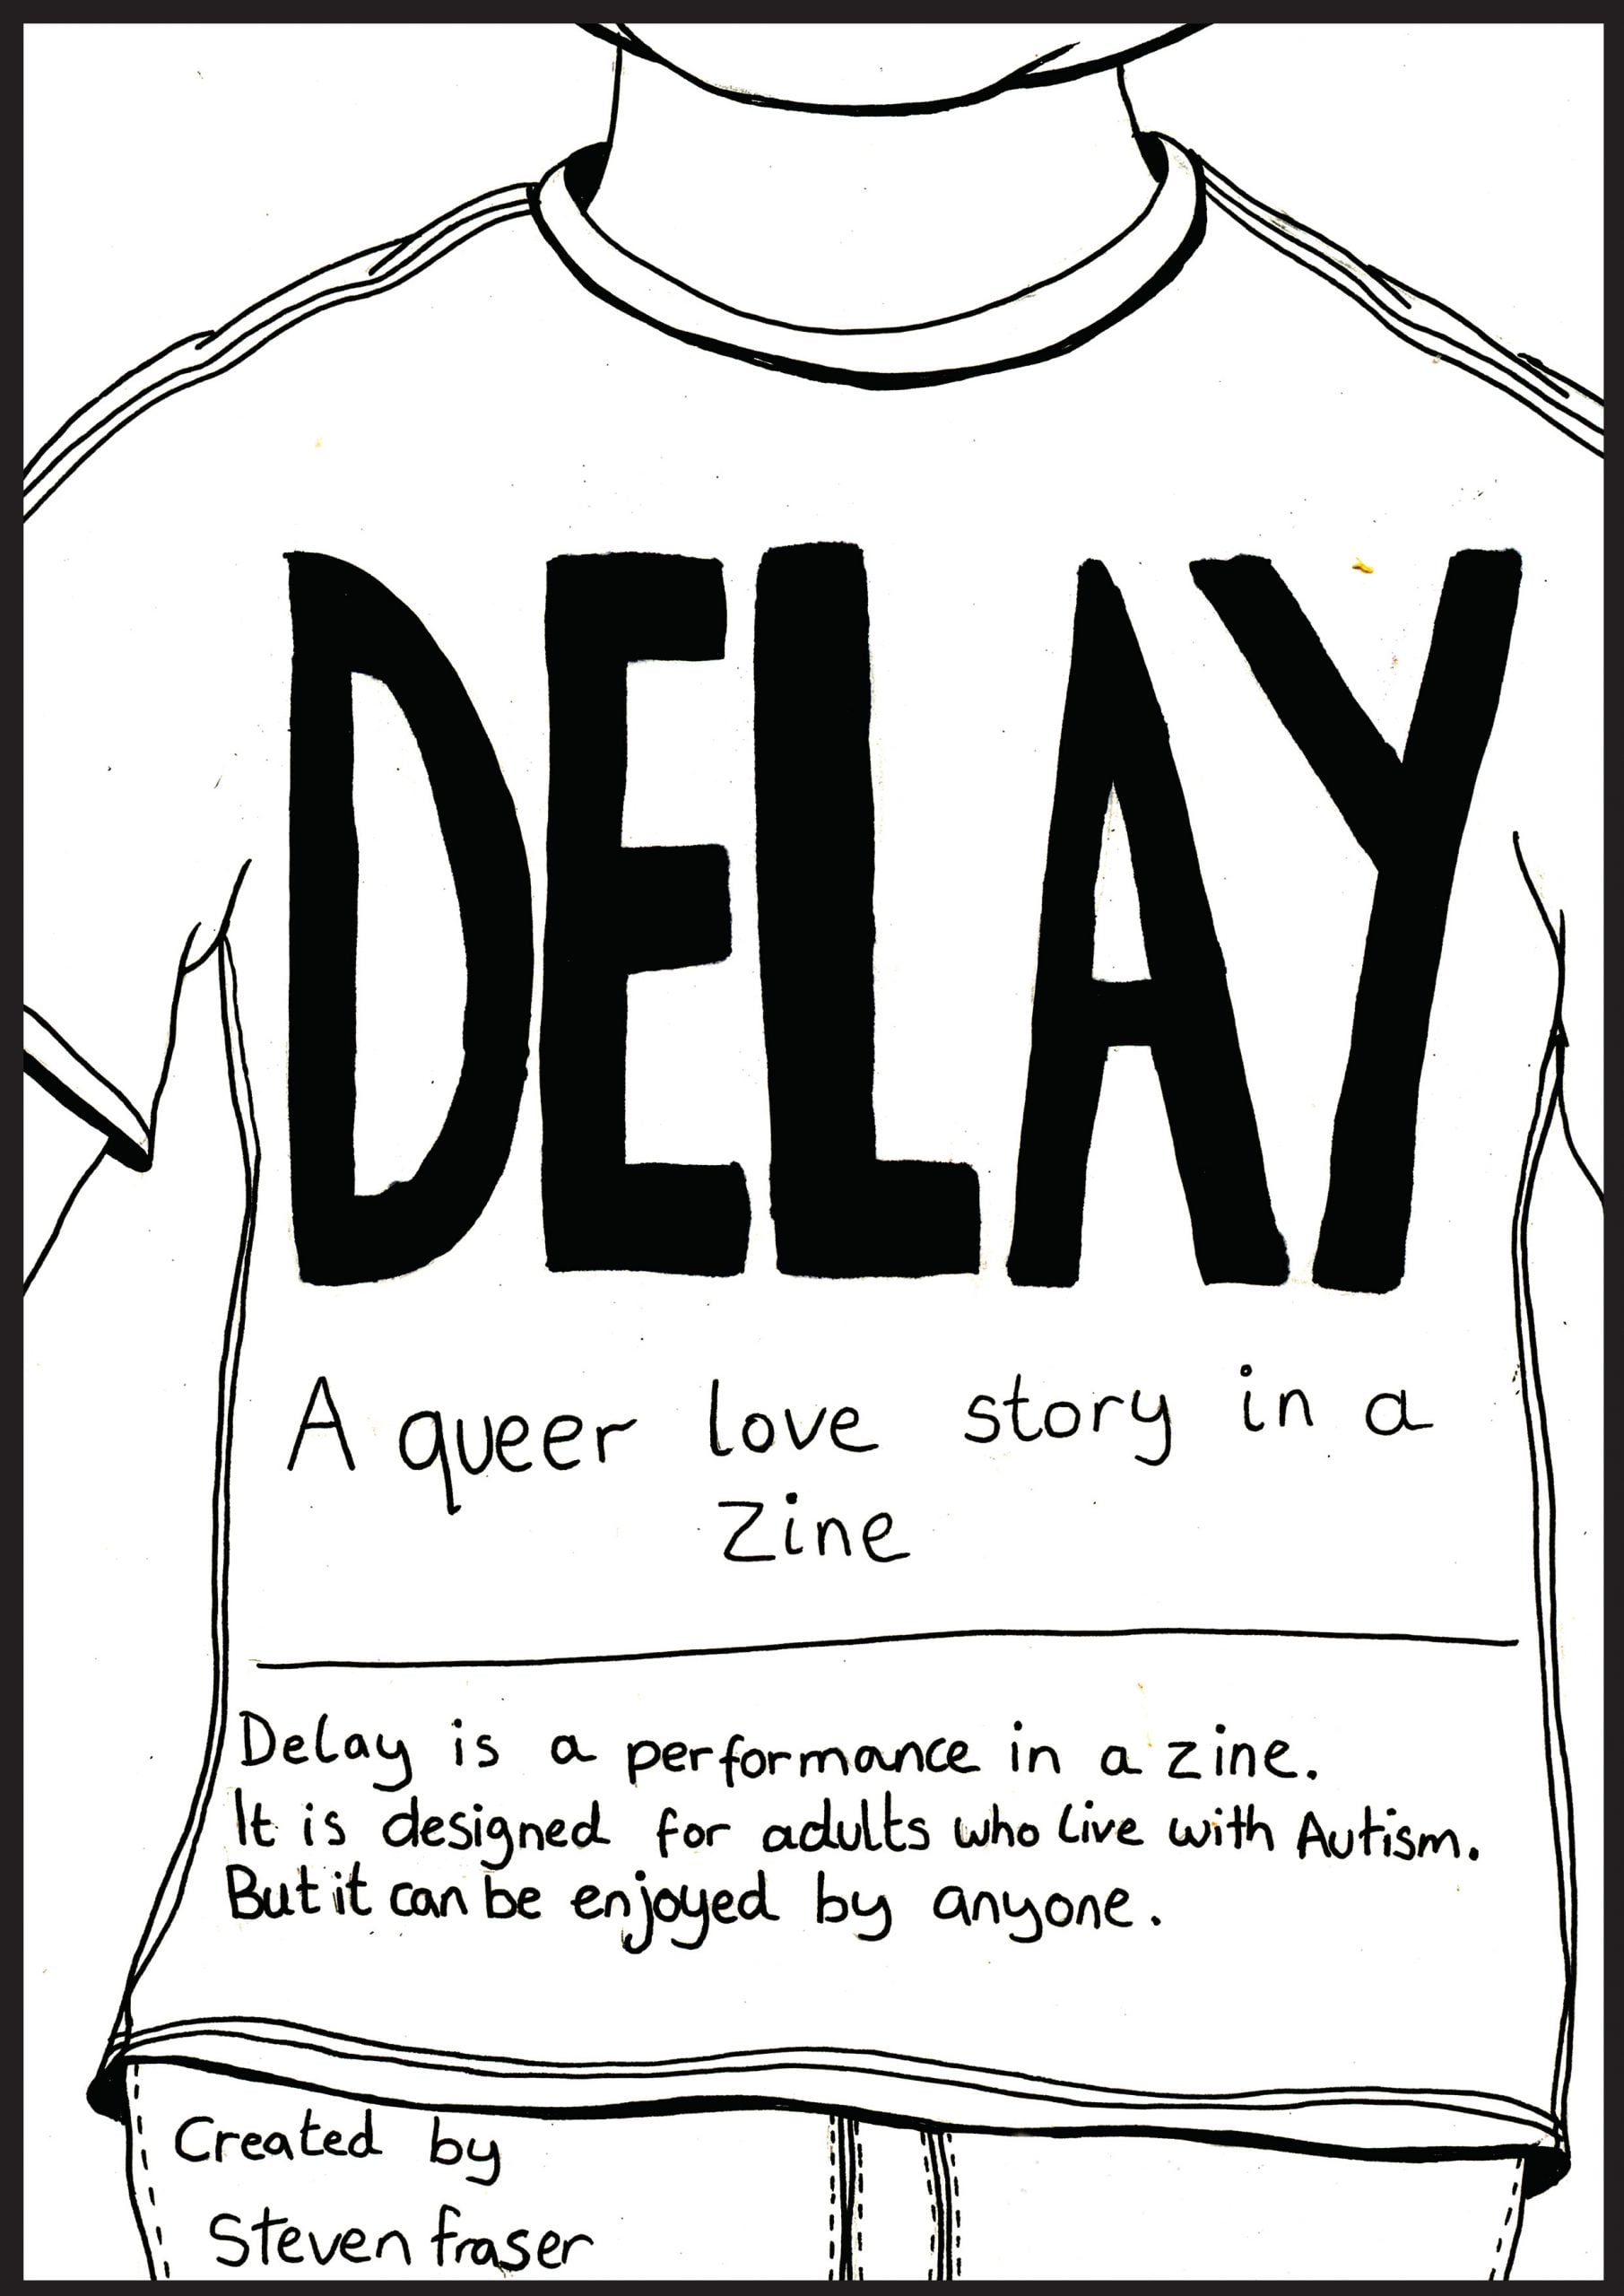 A twenty page downloadable PDF zine titled DELAY. In black pen the outline of the torso of a person wearing a plain t-shirt fills the white page and contains the title of the zine. It reads: “DELAY. A queer love story in a zine. Delay is a performance in a zine. It is designed for adults who live with autism. But it can be enjoyed by anyone. Created by Steven Fraser.”